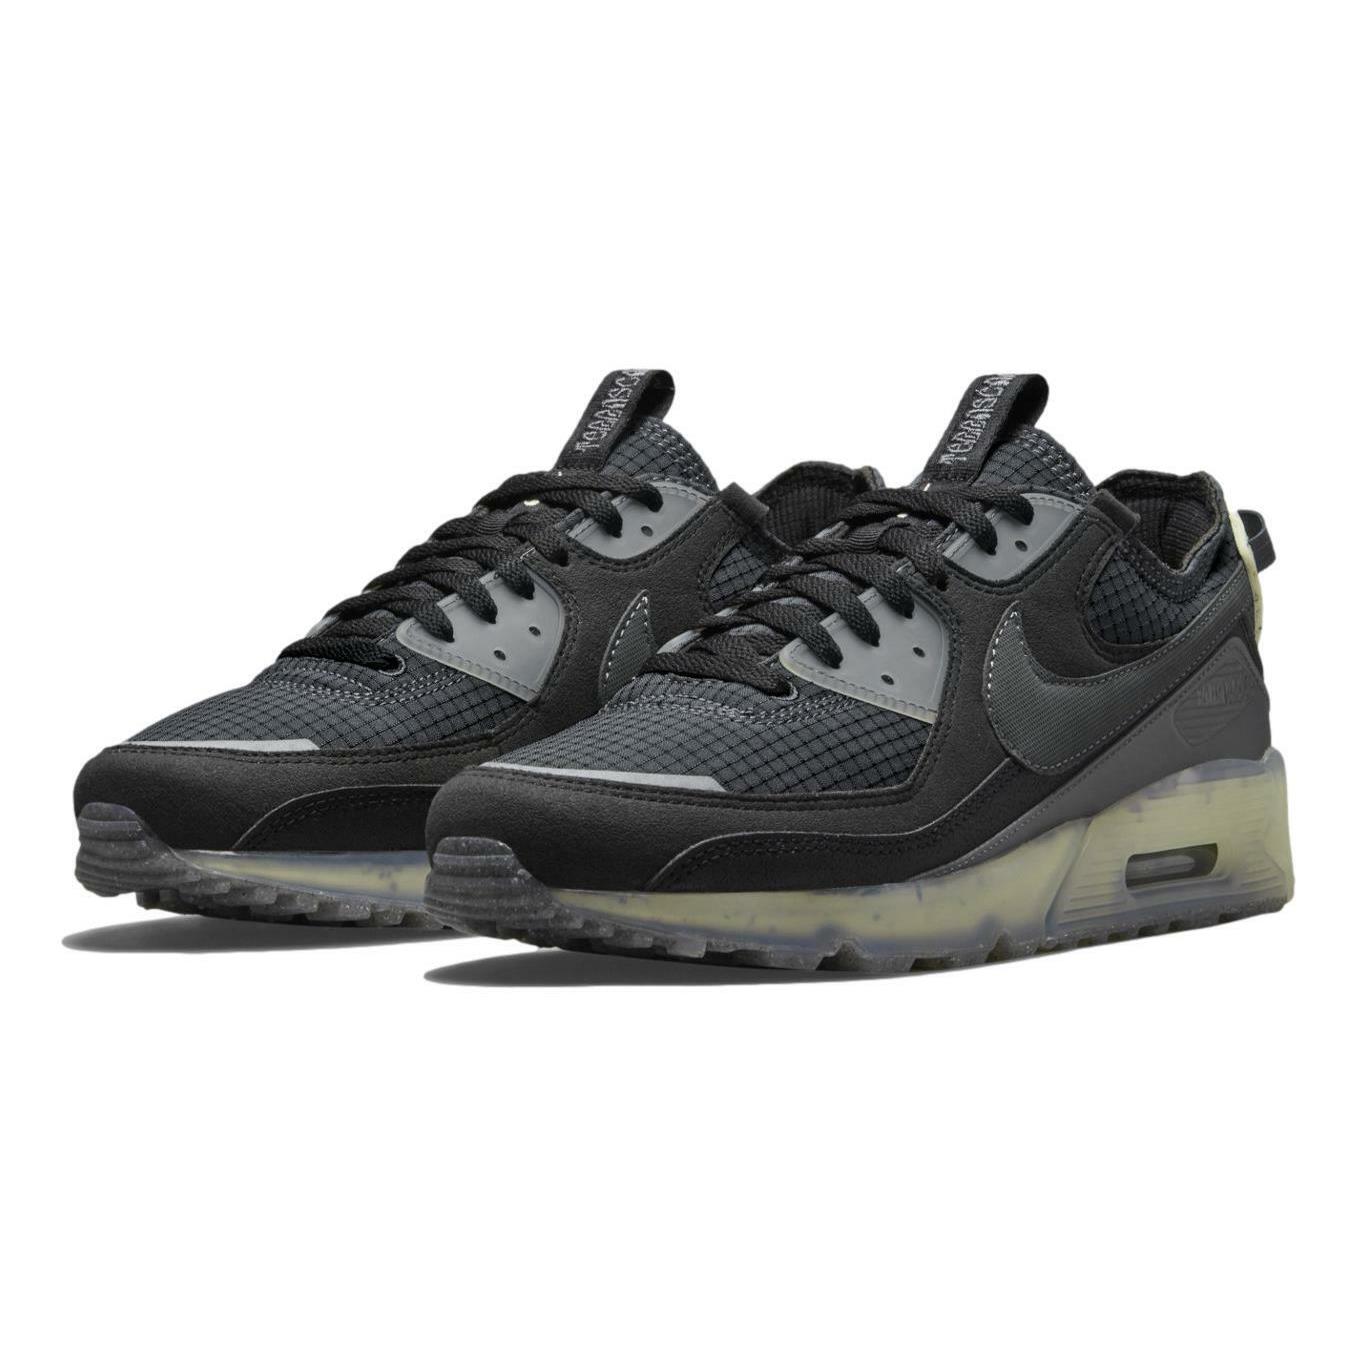 Nike Men`s Air Max 90 Terrascape `black Lime Ice` Shoes DH2973-001 - Black/Dark Grey-Lime Ice